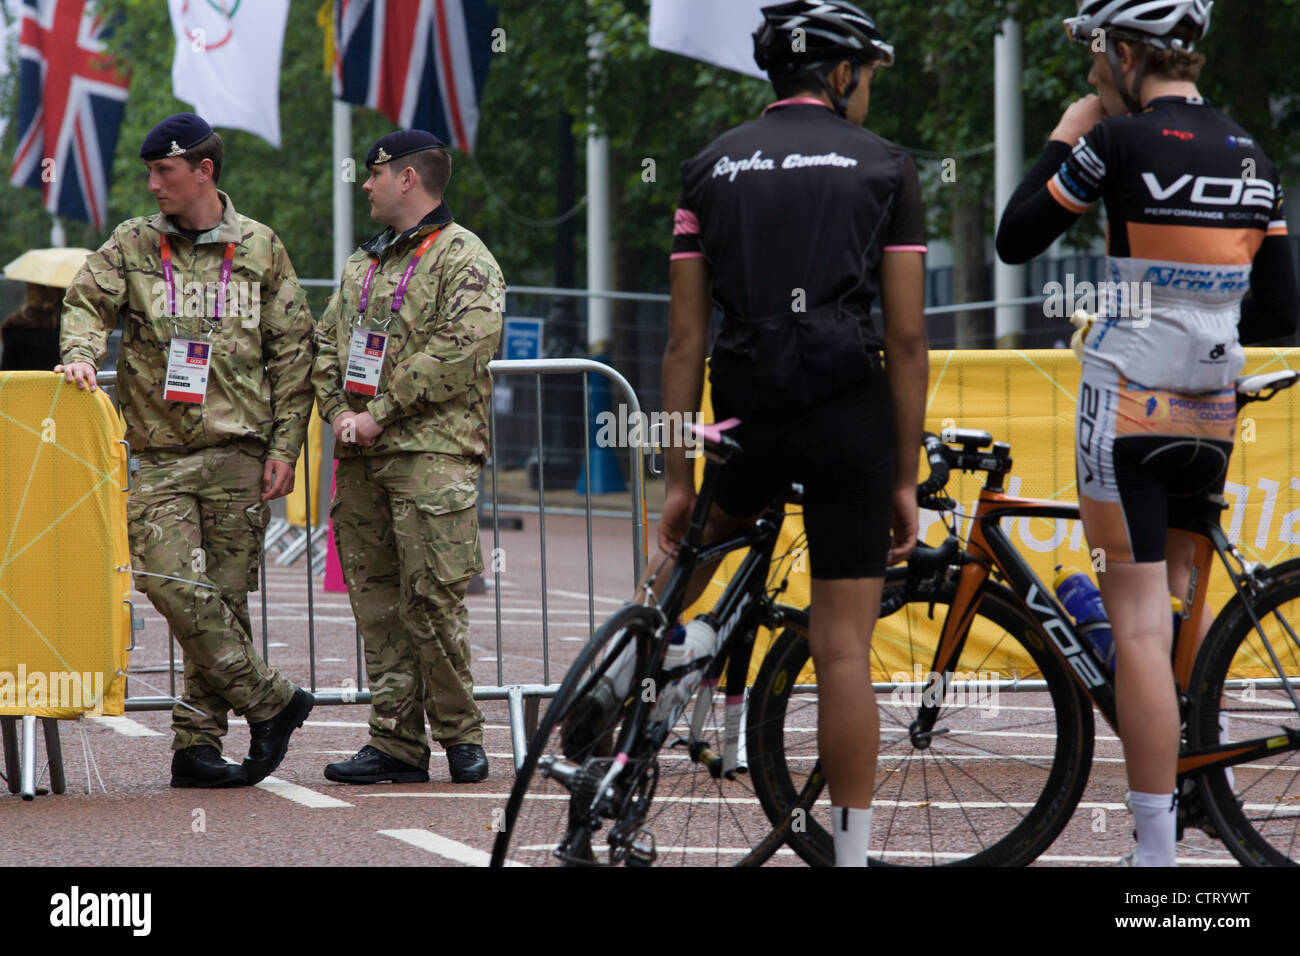 Cyclists with soldiers the Royal Artillery regiment in the British army stand guarding the entrance to the volleyball venue in central London next to the IOC rings logo on day 4 of the London 2012 Olympic Games. A further 1,200 military personnel are being deployed to help secure the 2012 Olympics in London following the failure by security contractor G4S to provide enough private guards. The extra personnel have been drafted in amid continuing fears that the private security contractor's handling of the £284m contract remains a risk to the Games. Stock Photo